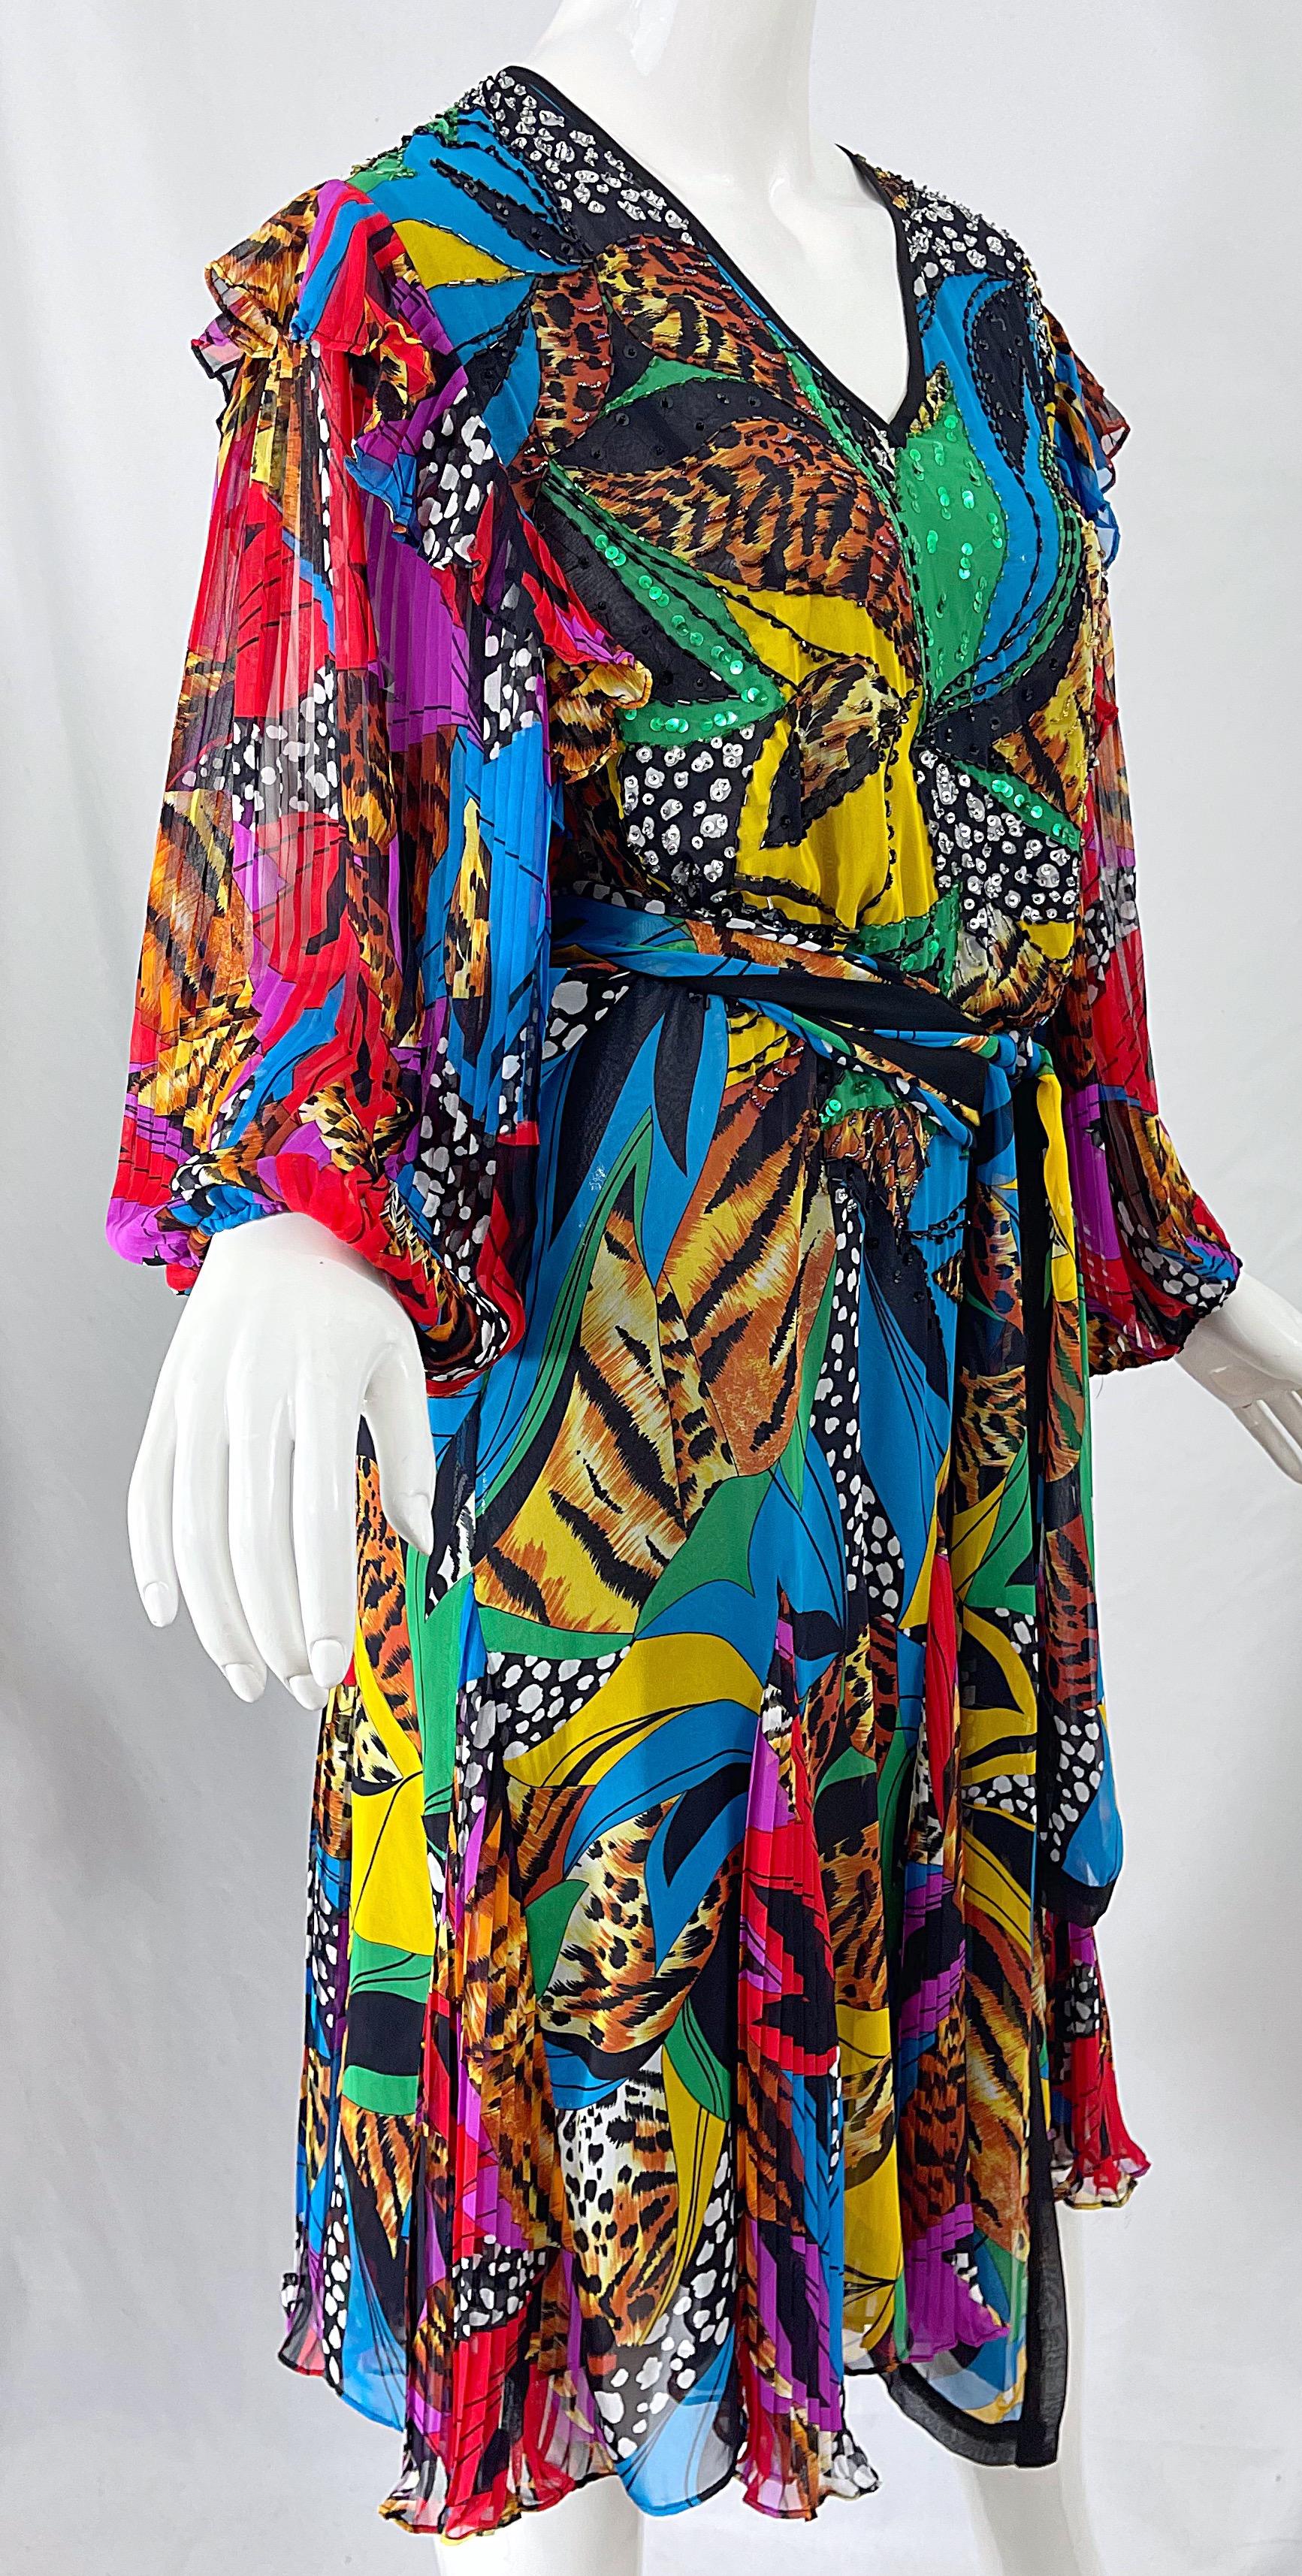 Diane Freis 1980s Chiffon Beaded Sequin Abstract Animal Print Vintage Dress Sash In Excellent Condition For Sale In San Diego, CA